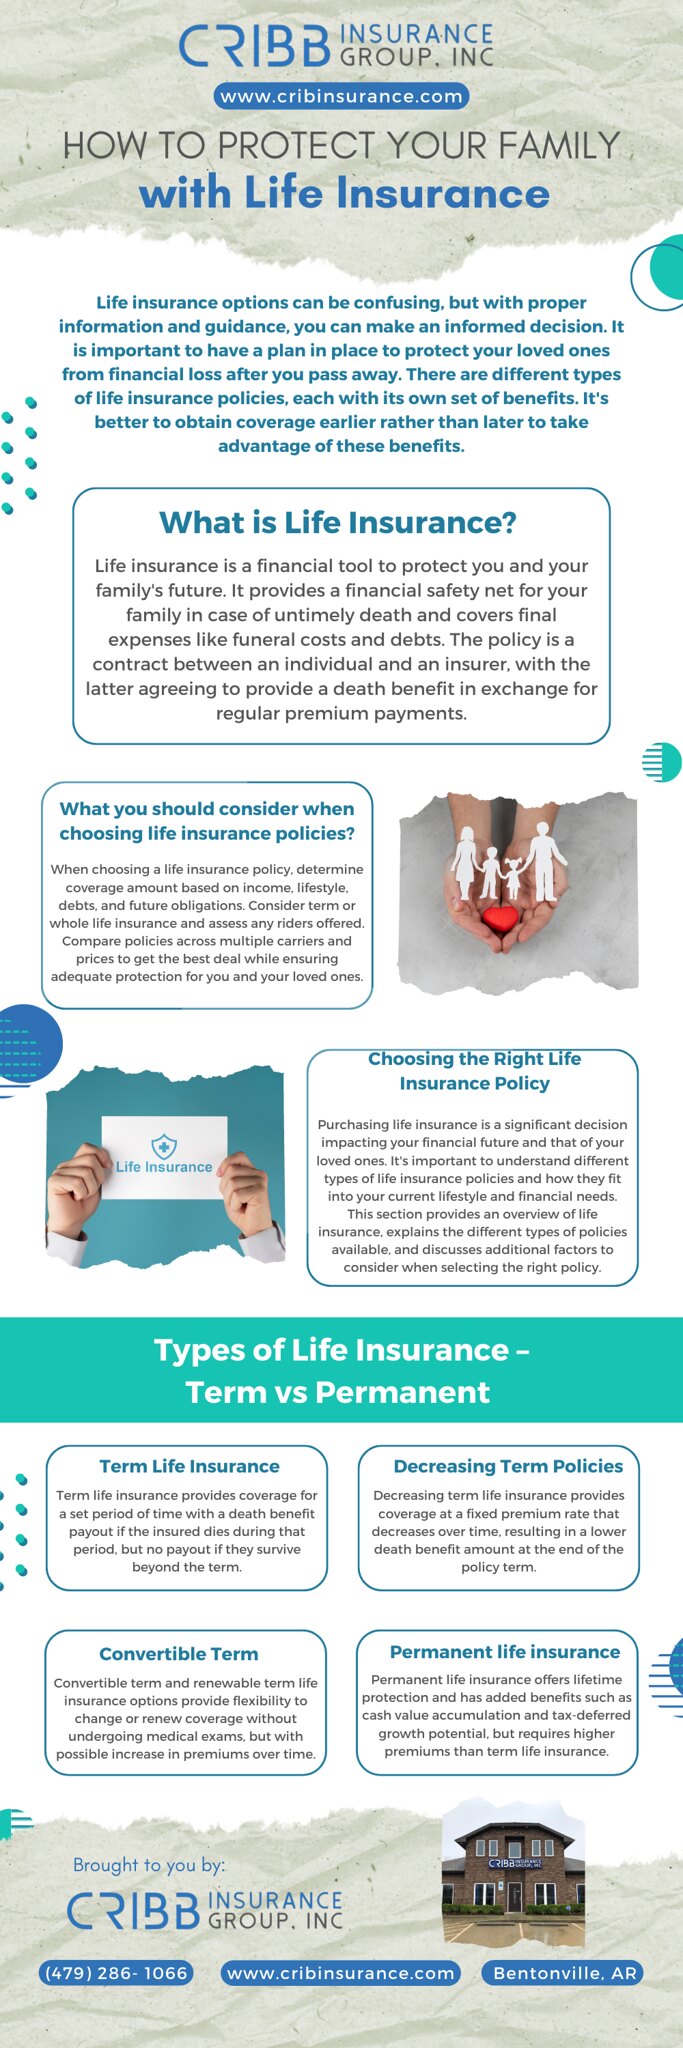 How to Protect your Family Life Insurance